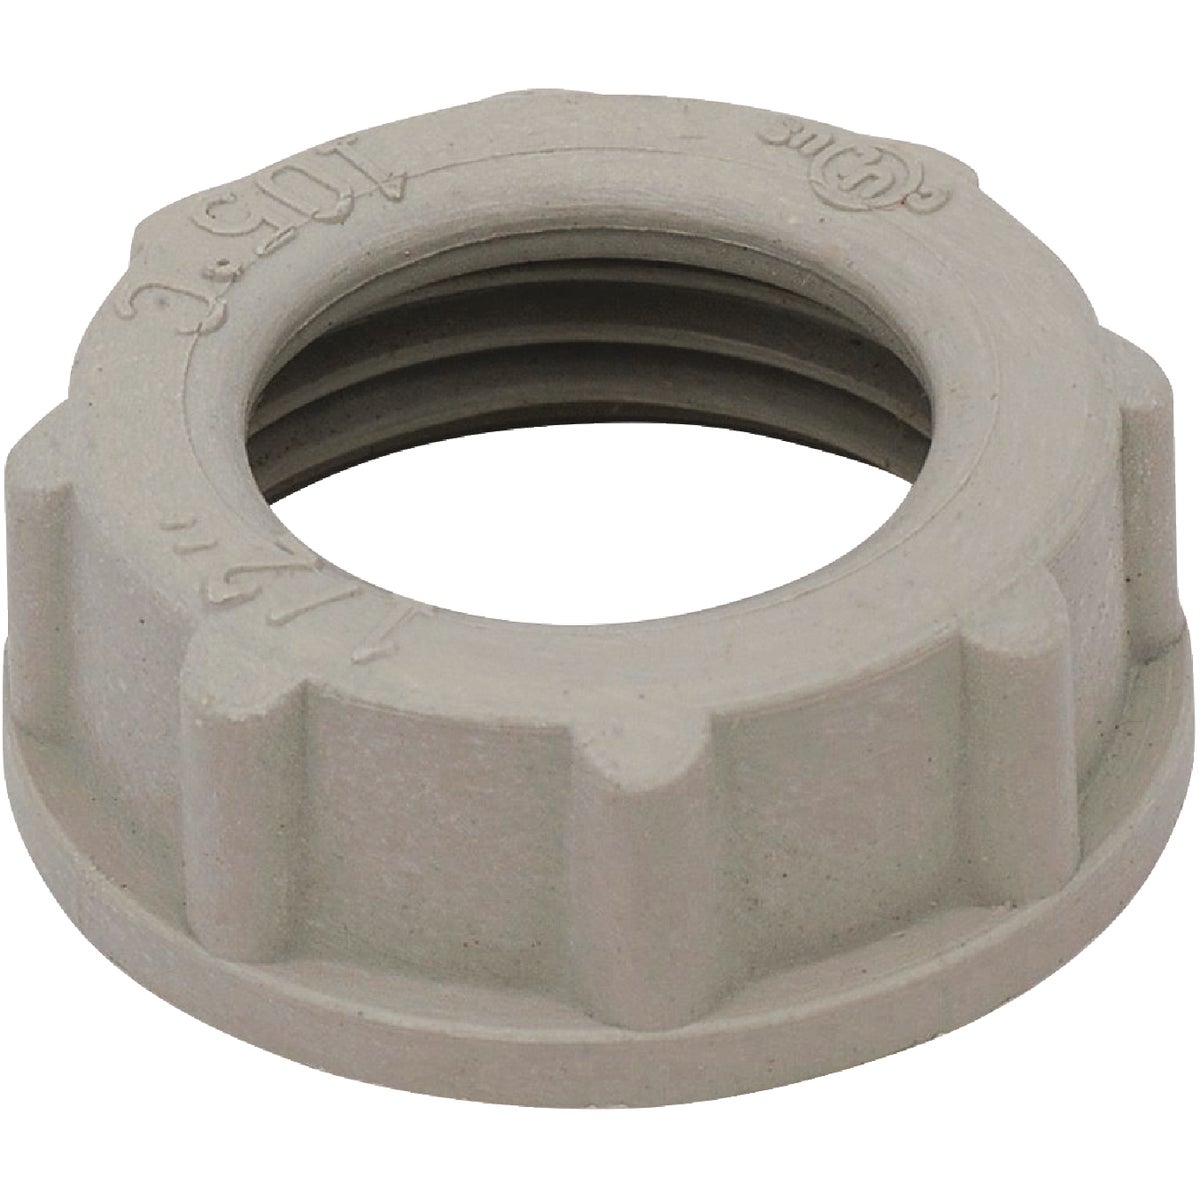 Southwire Madison Electric 3/4 In. Rigid/EMT Insulating Conduit Bushing (100-Pack)